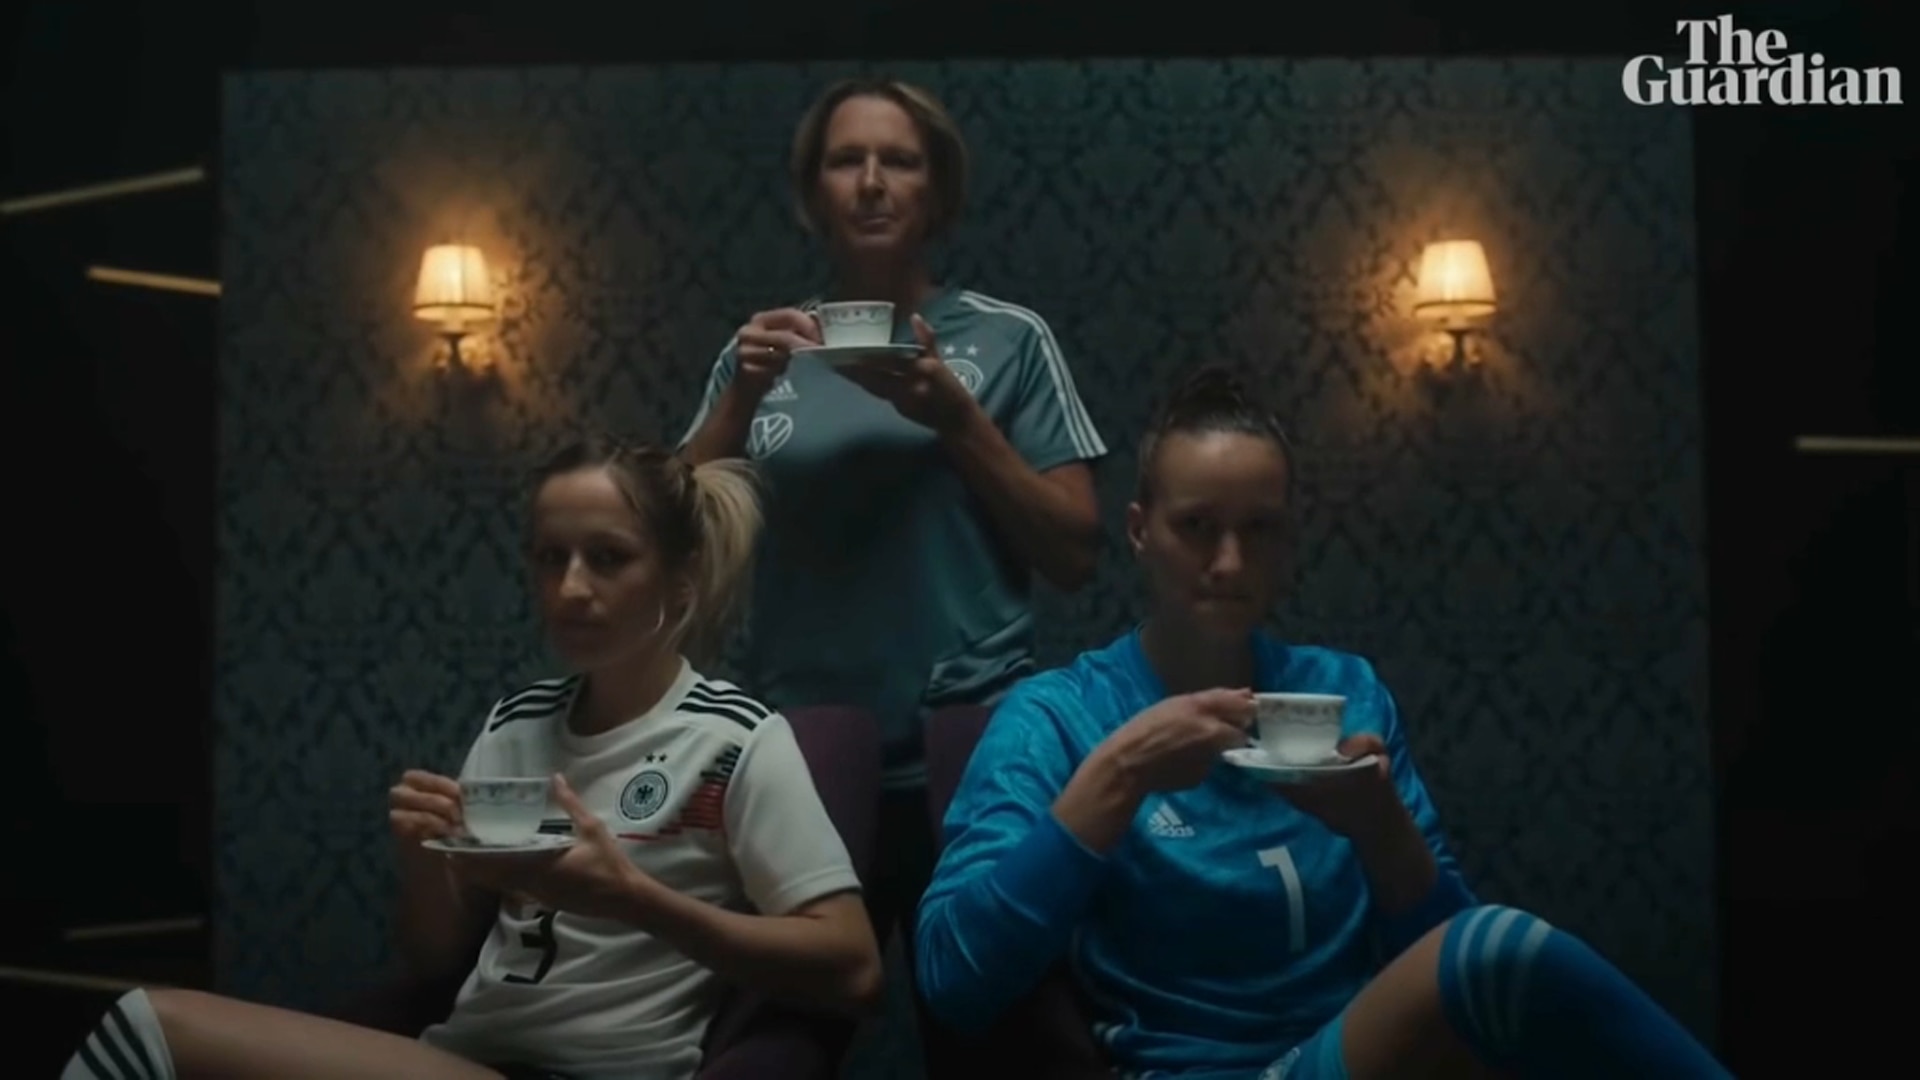 Germany was given a tea set for winning their first title